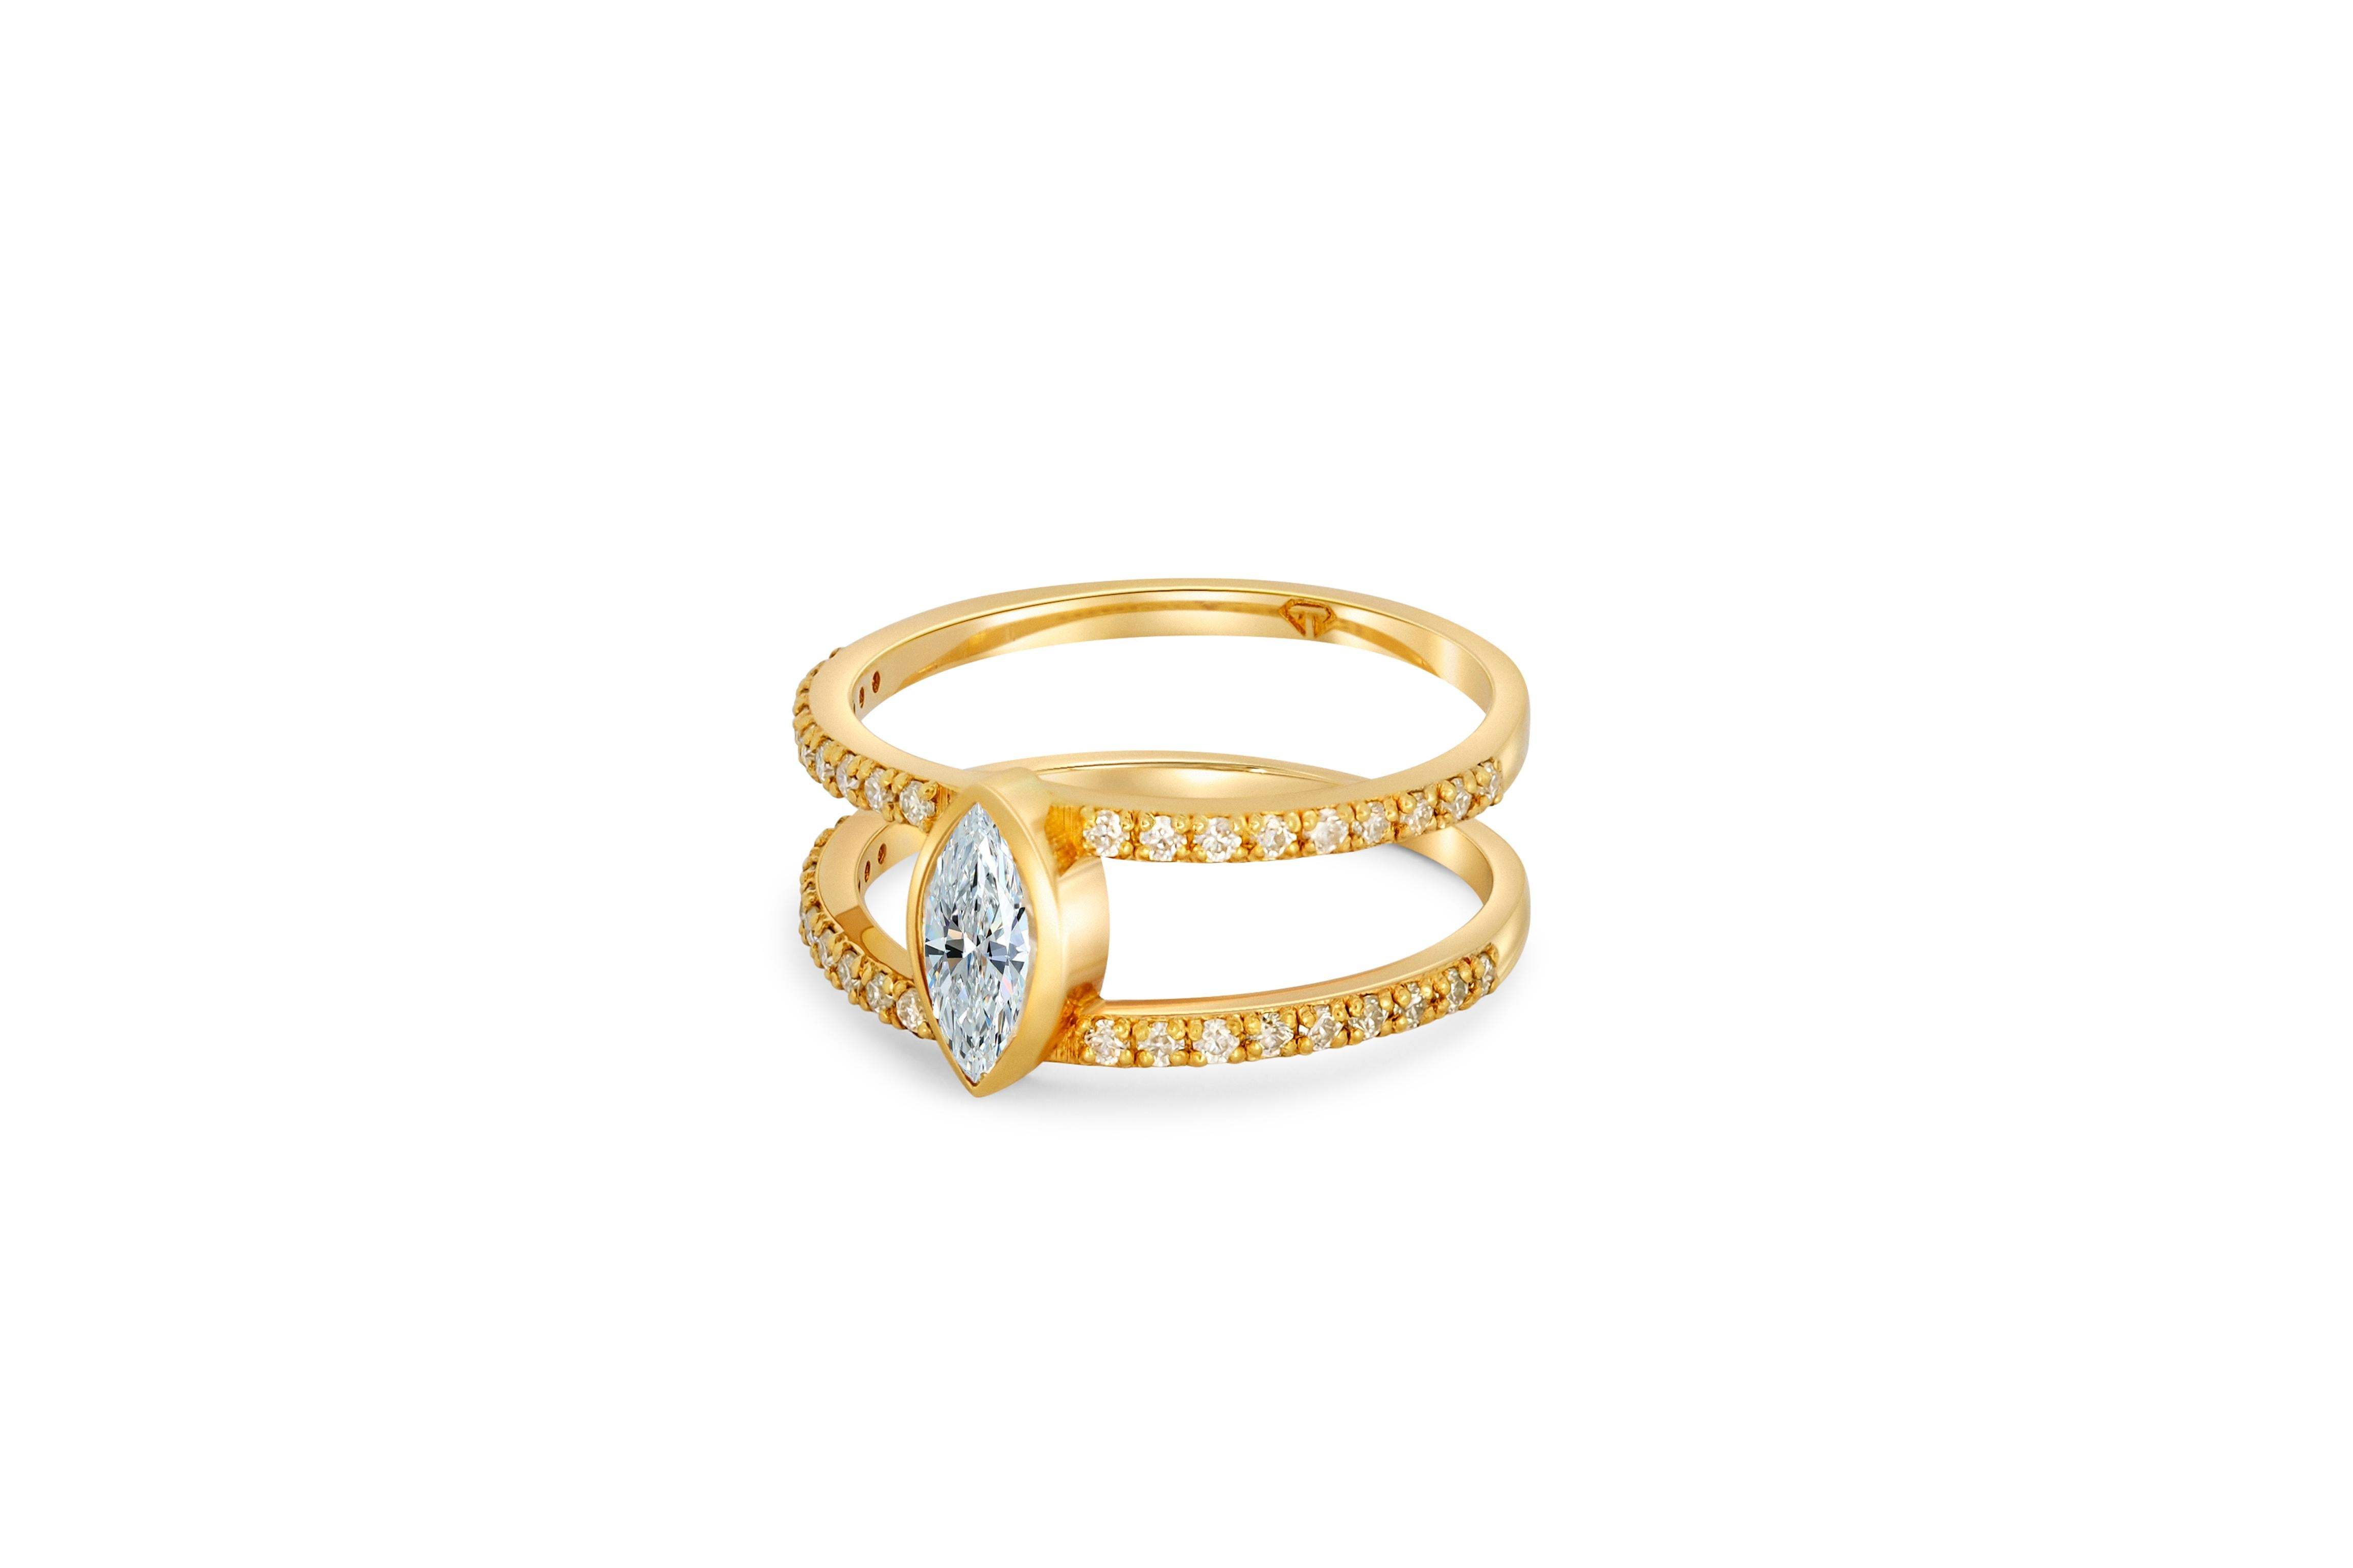 For Sale:  1 ct Marquise moissanite engagement ring in 14k gold.  5